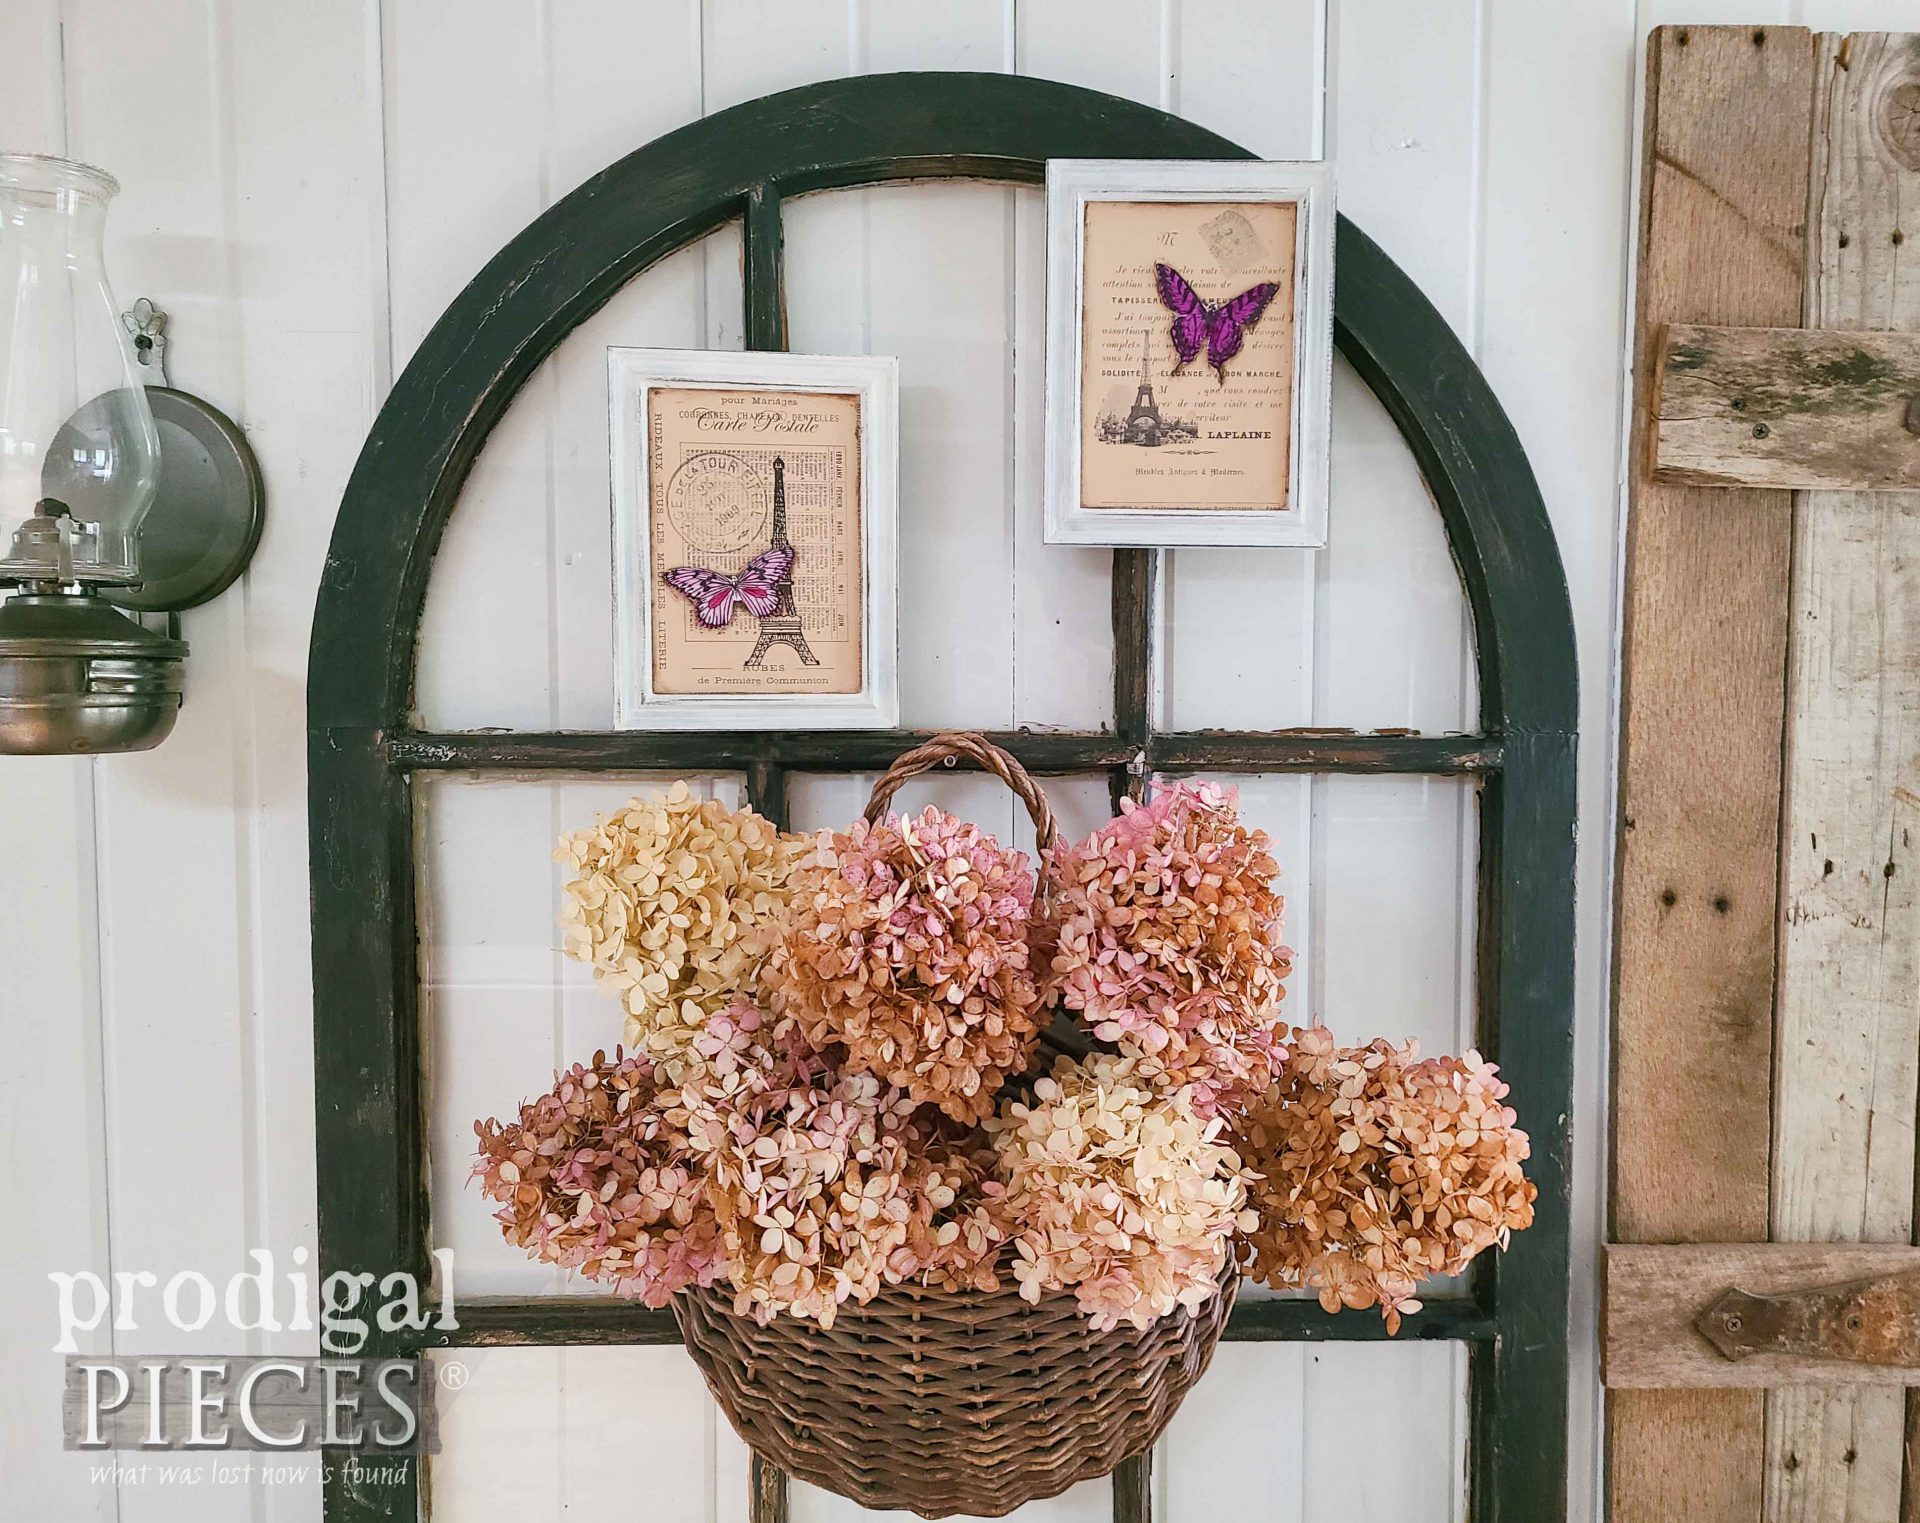 DIY French Butterfly Art from Thrift Store Frames by Larissa of Prodigal Pieces | prodigalpieces.com #prodigalpieces #diy #art #upcycled #french